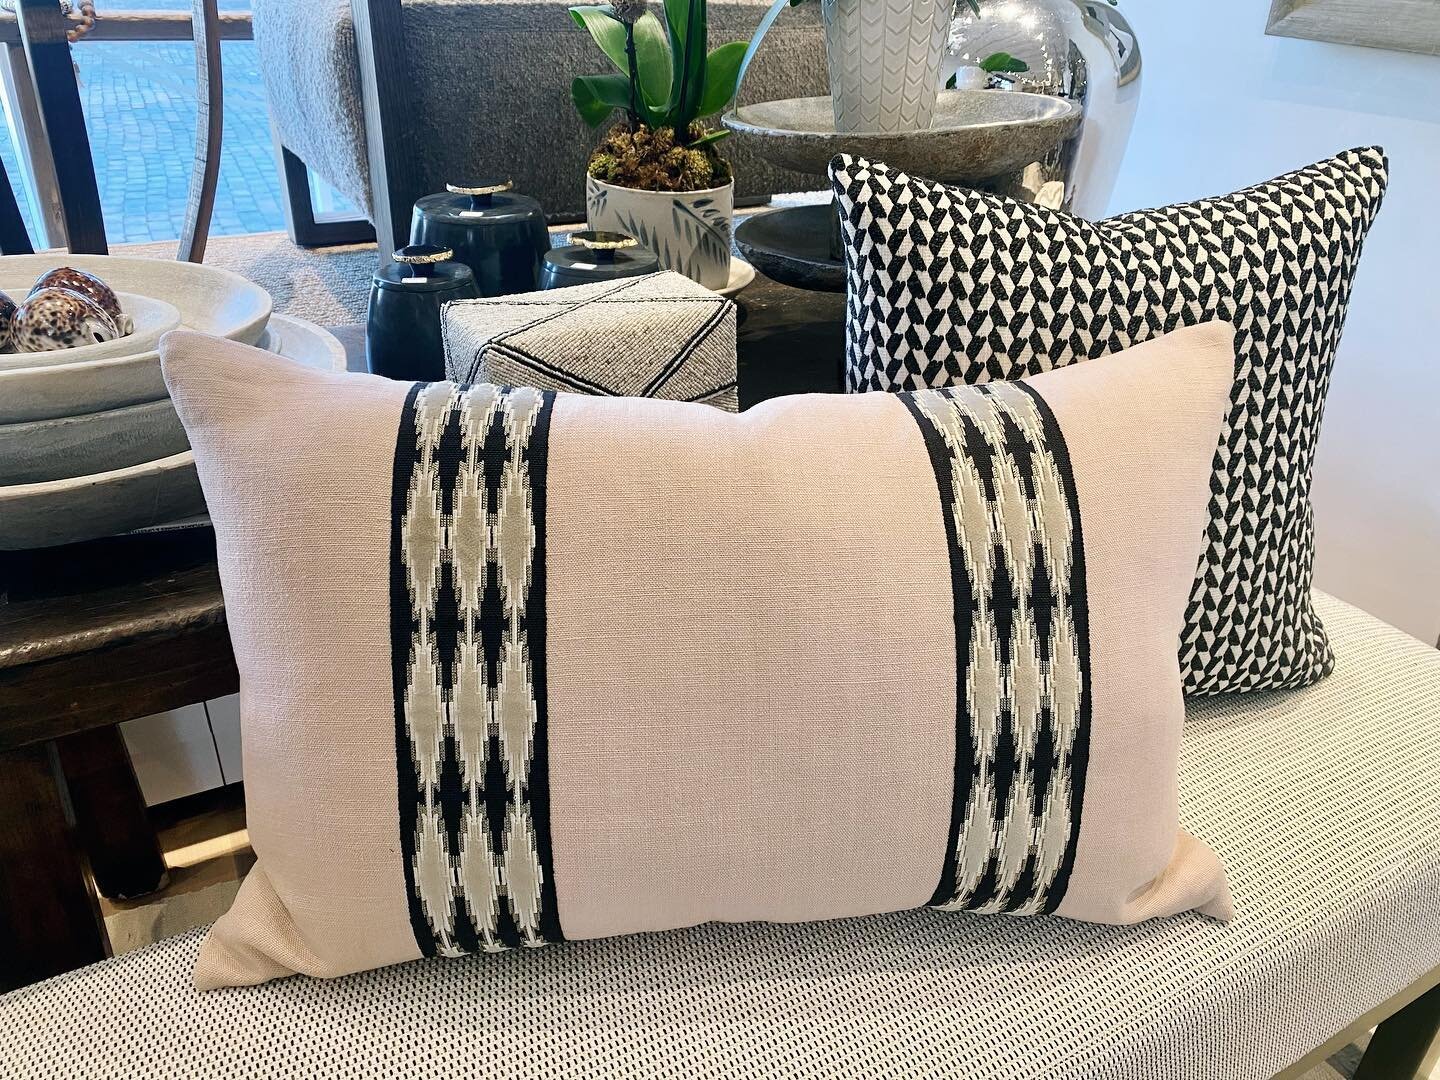 Complete your space with custom pillows from Interior Philosophy! 
We have so many indoor and outdoor textures and trims to choose from to make it your own.
.
.
.
#custompillows #interiordecor #interiordesign #atlantadesigners #interiorphilosophy #in